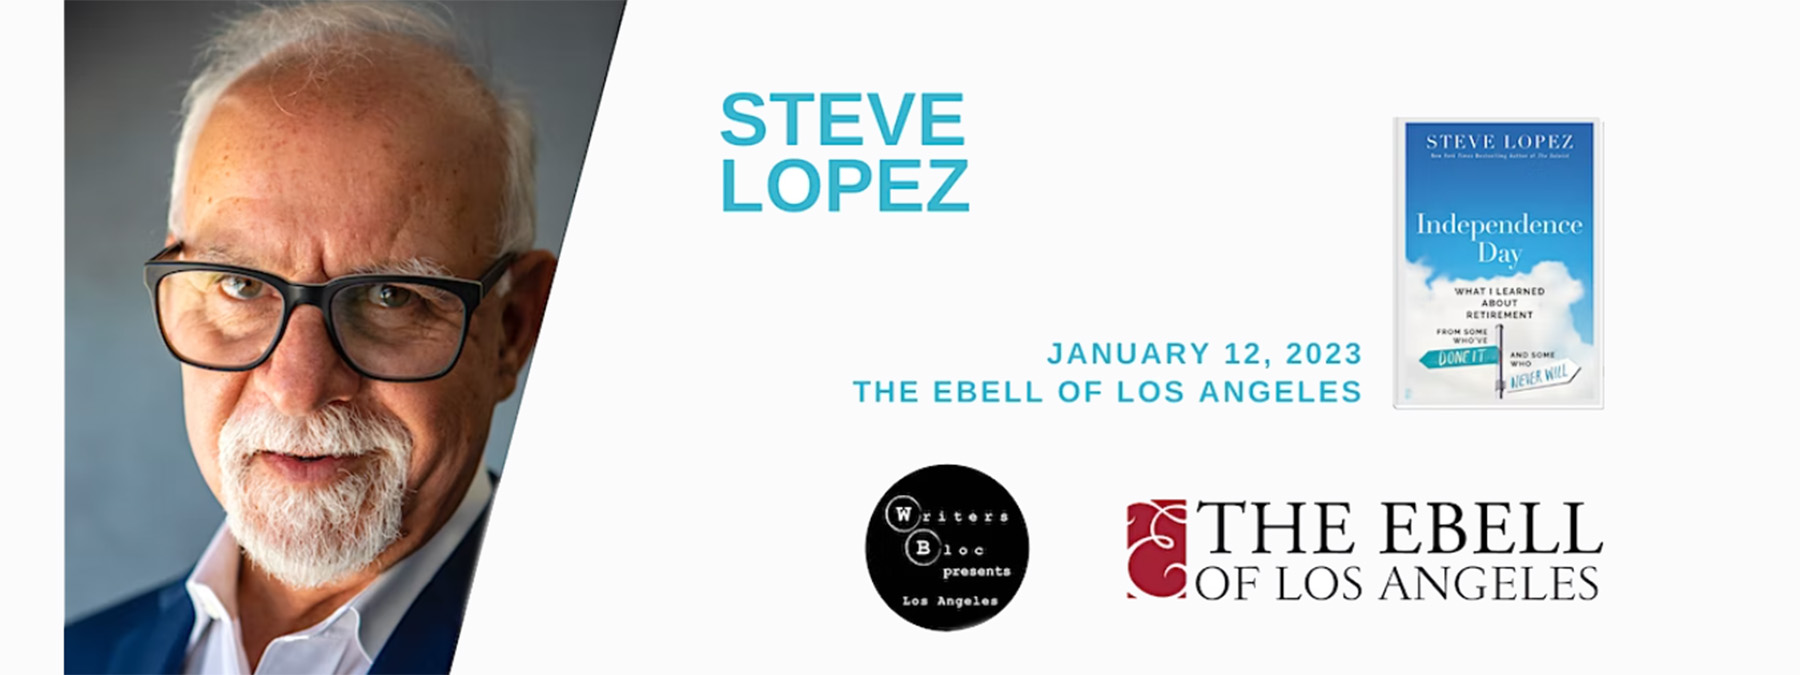 Join Steve Lopez and LAUSD officials for a live discussion on